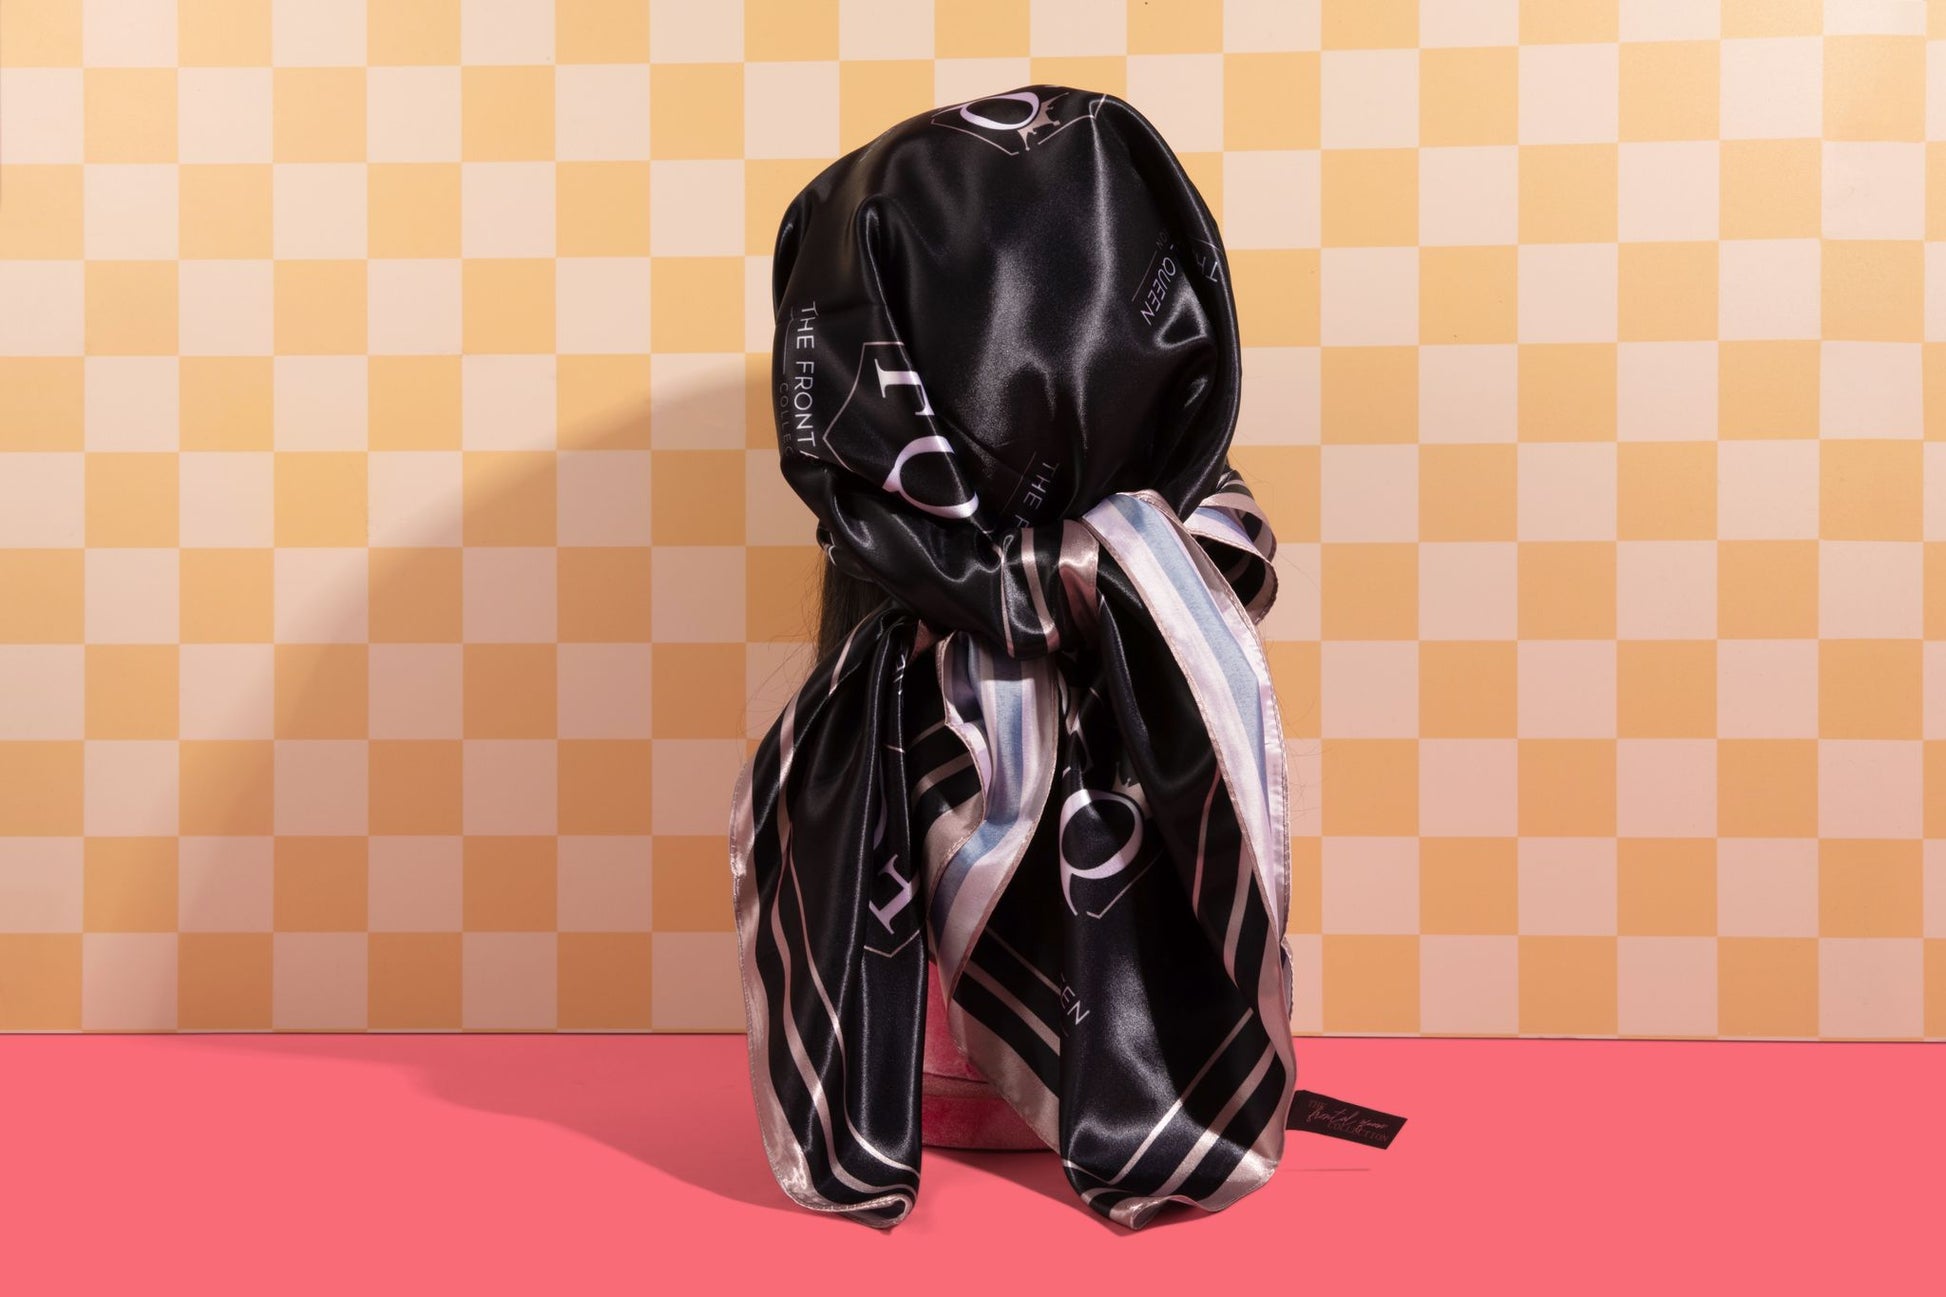 Luxe Silk Scarf by The Frontal Queen - BLACK - The Frontal Queen